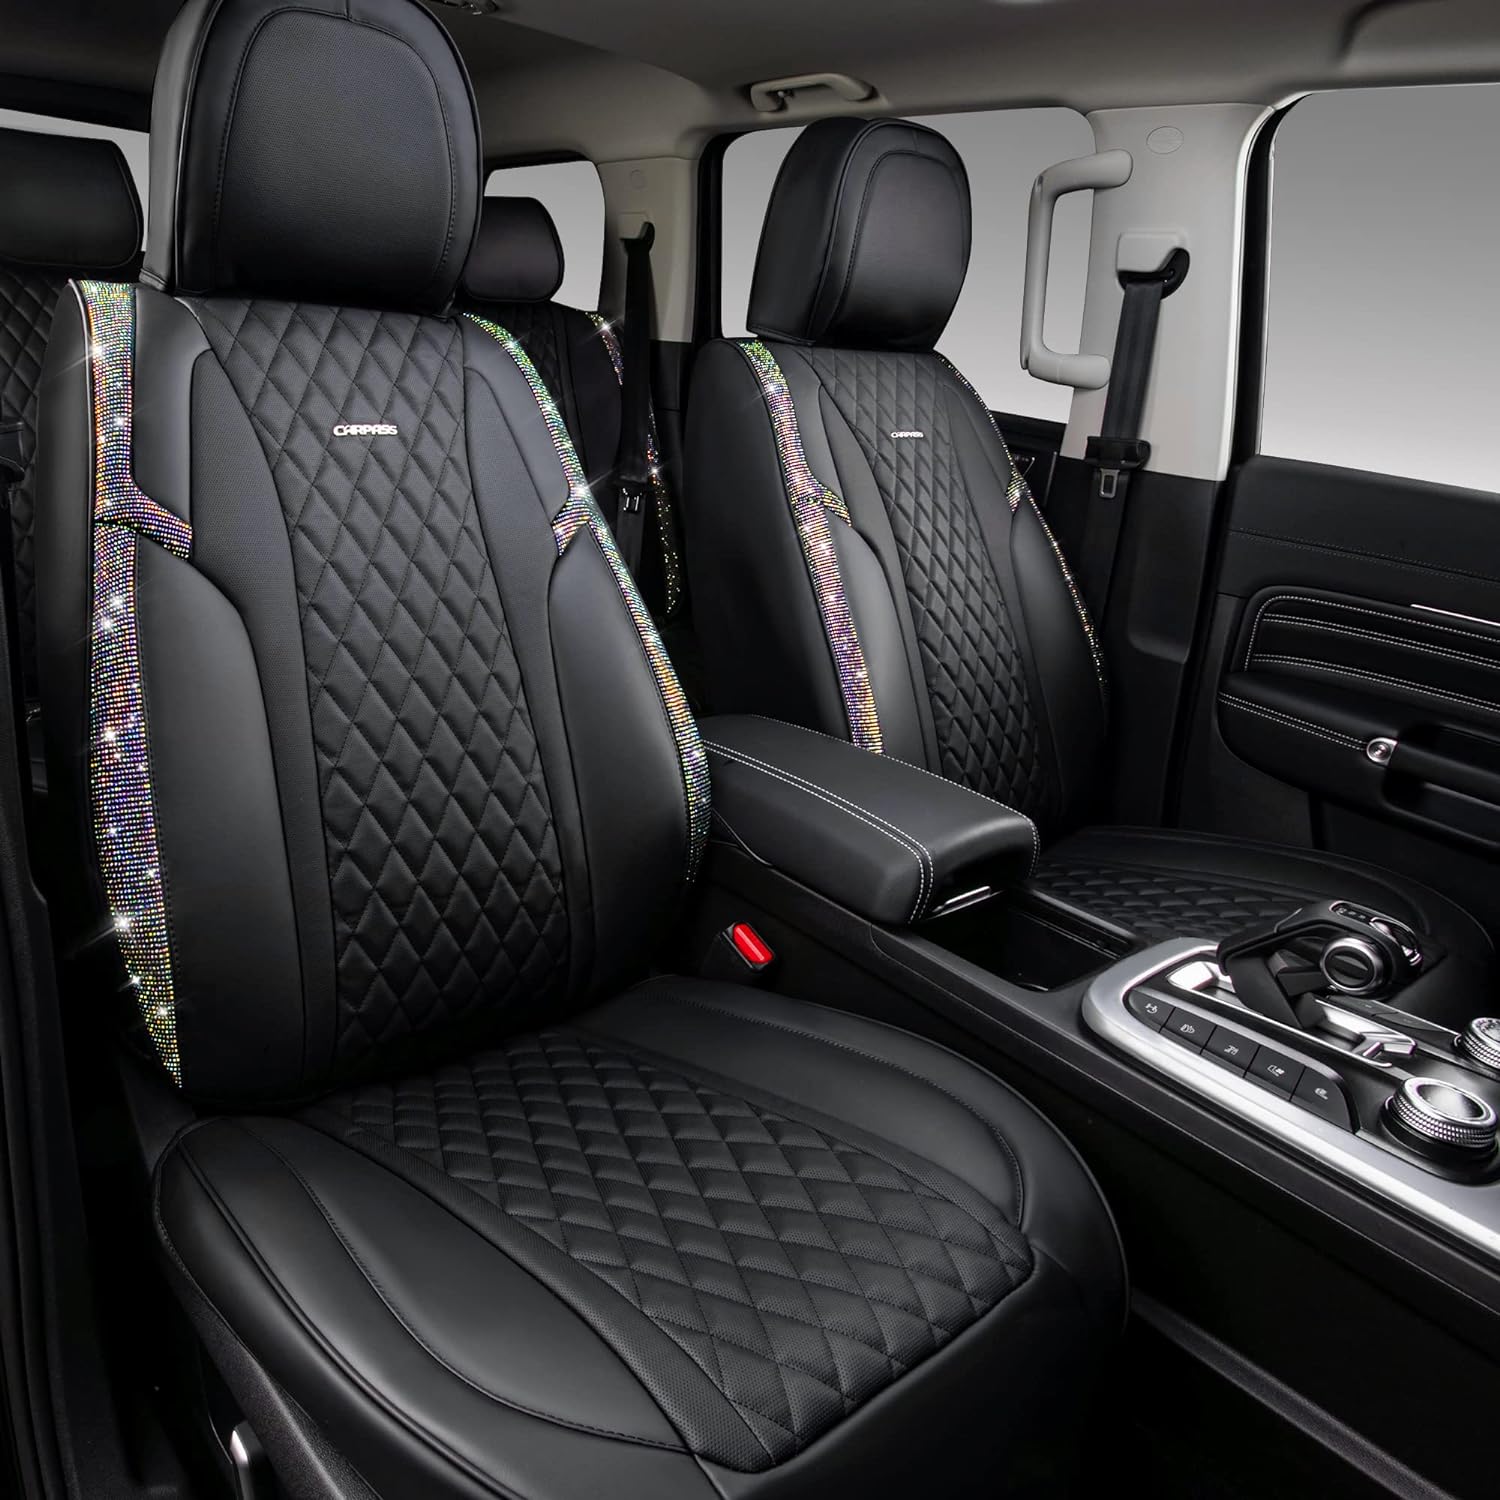 CAR PASS Iridescent Diamond Nappa Calfskin Leather Cushioned,Bling Seat Covers & Steering Cover & Car Floor Mats Universal Fit for Auto SUV Sedan,Sparkly Glitter Shining Rhinestone